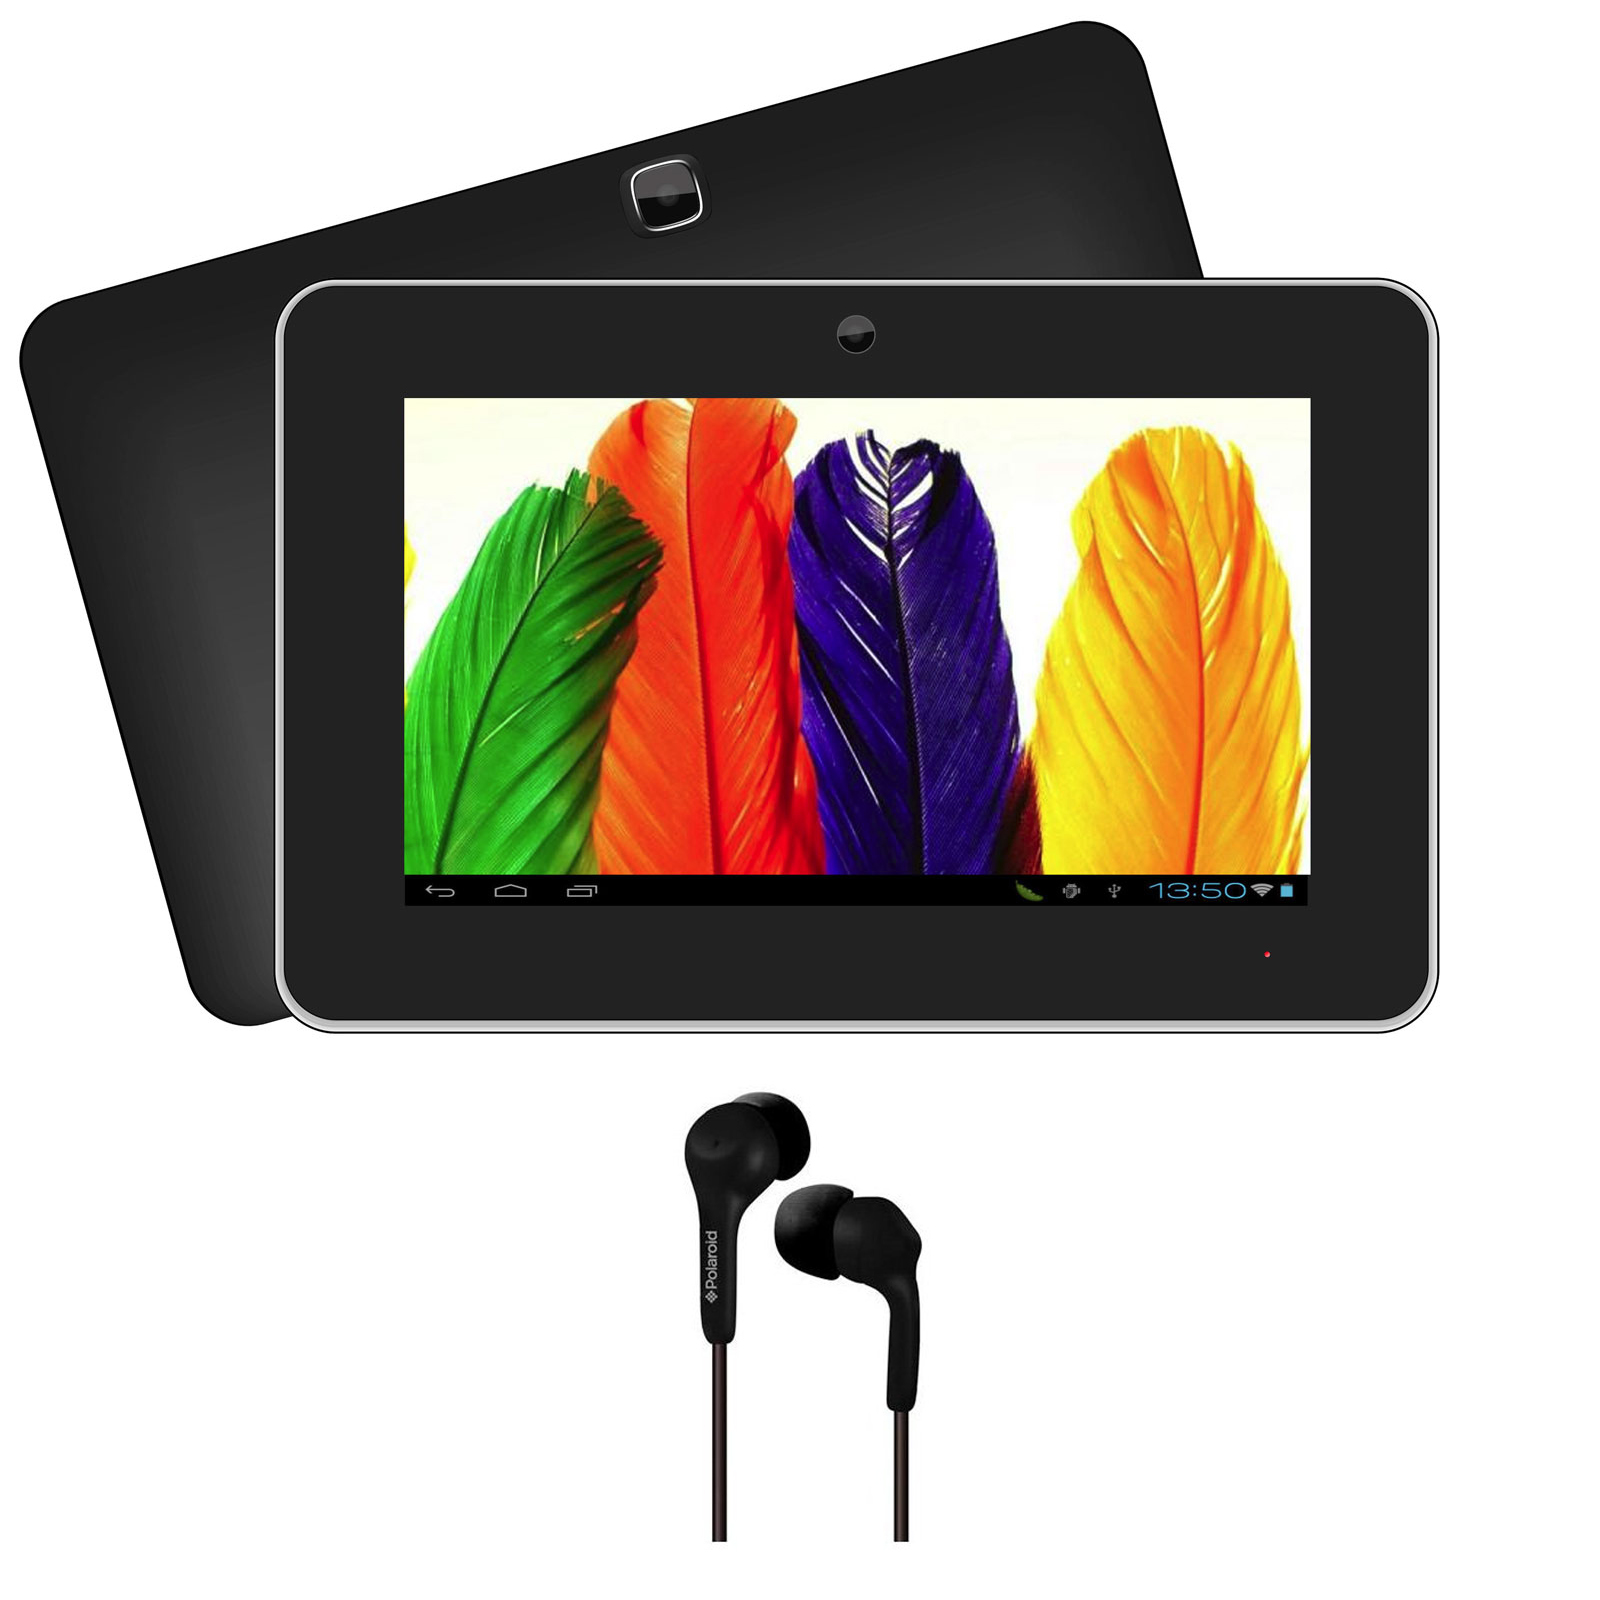 Supersonic SC-90JB 9 inch Android 4.1 Touch Screen Tablet 8 GB Bundle - image 1 of 1